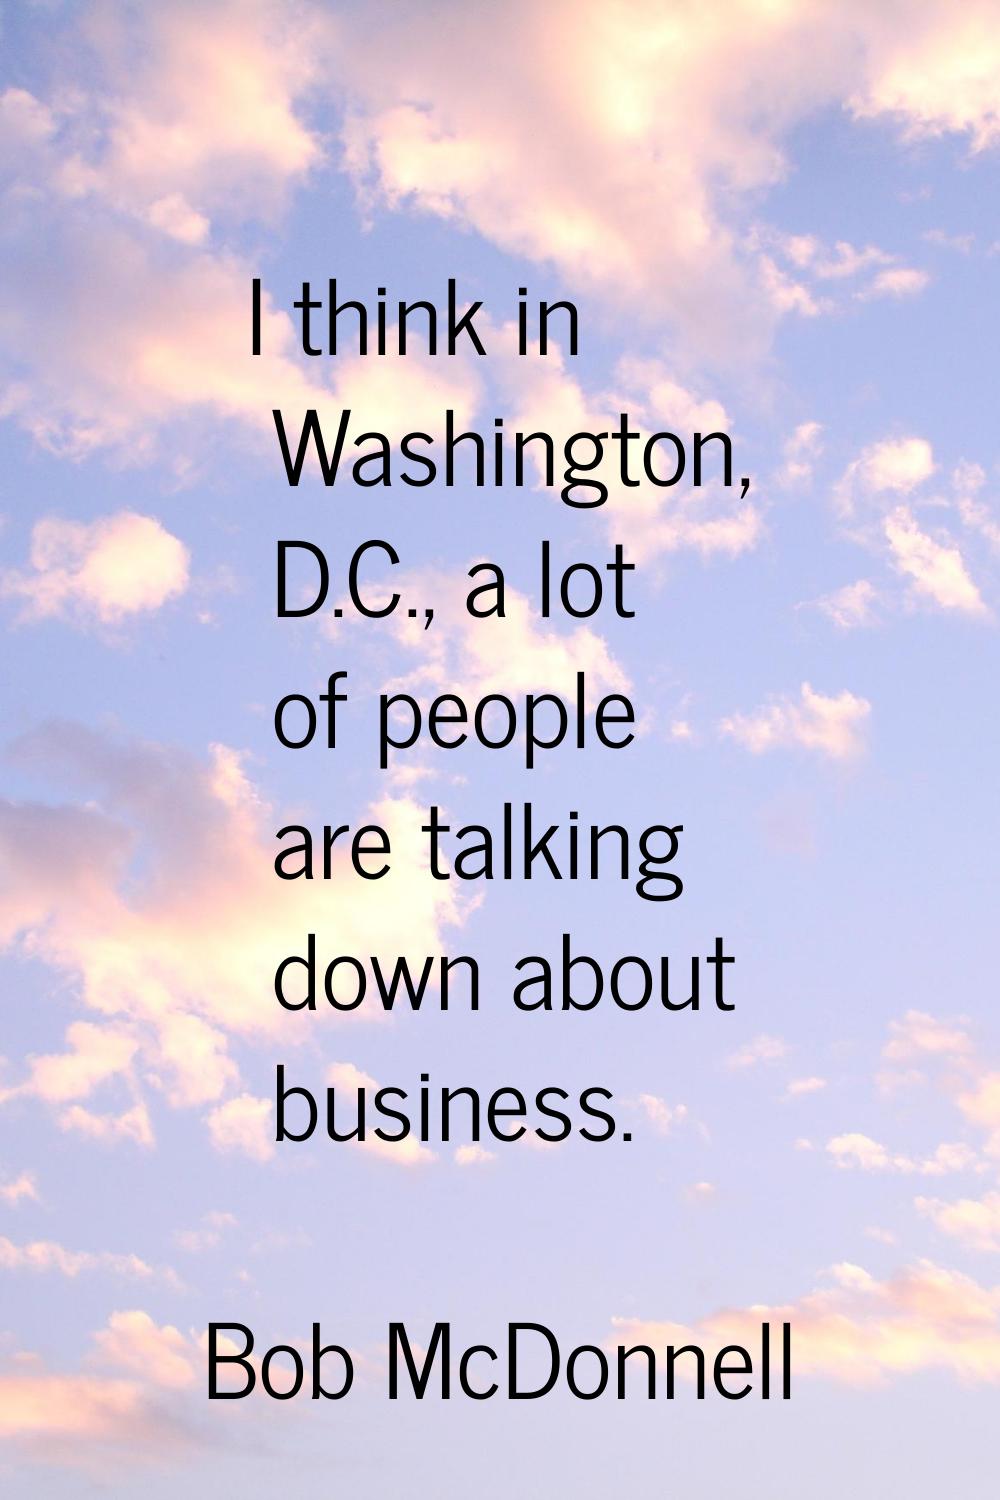 I think in Washington, D.C., a lot of people are talking down about business.